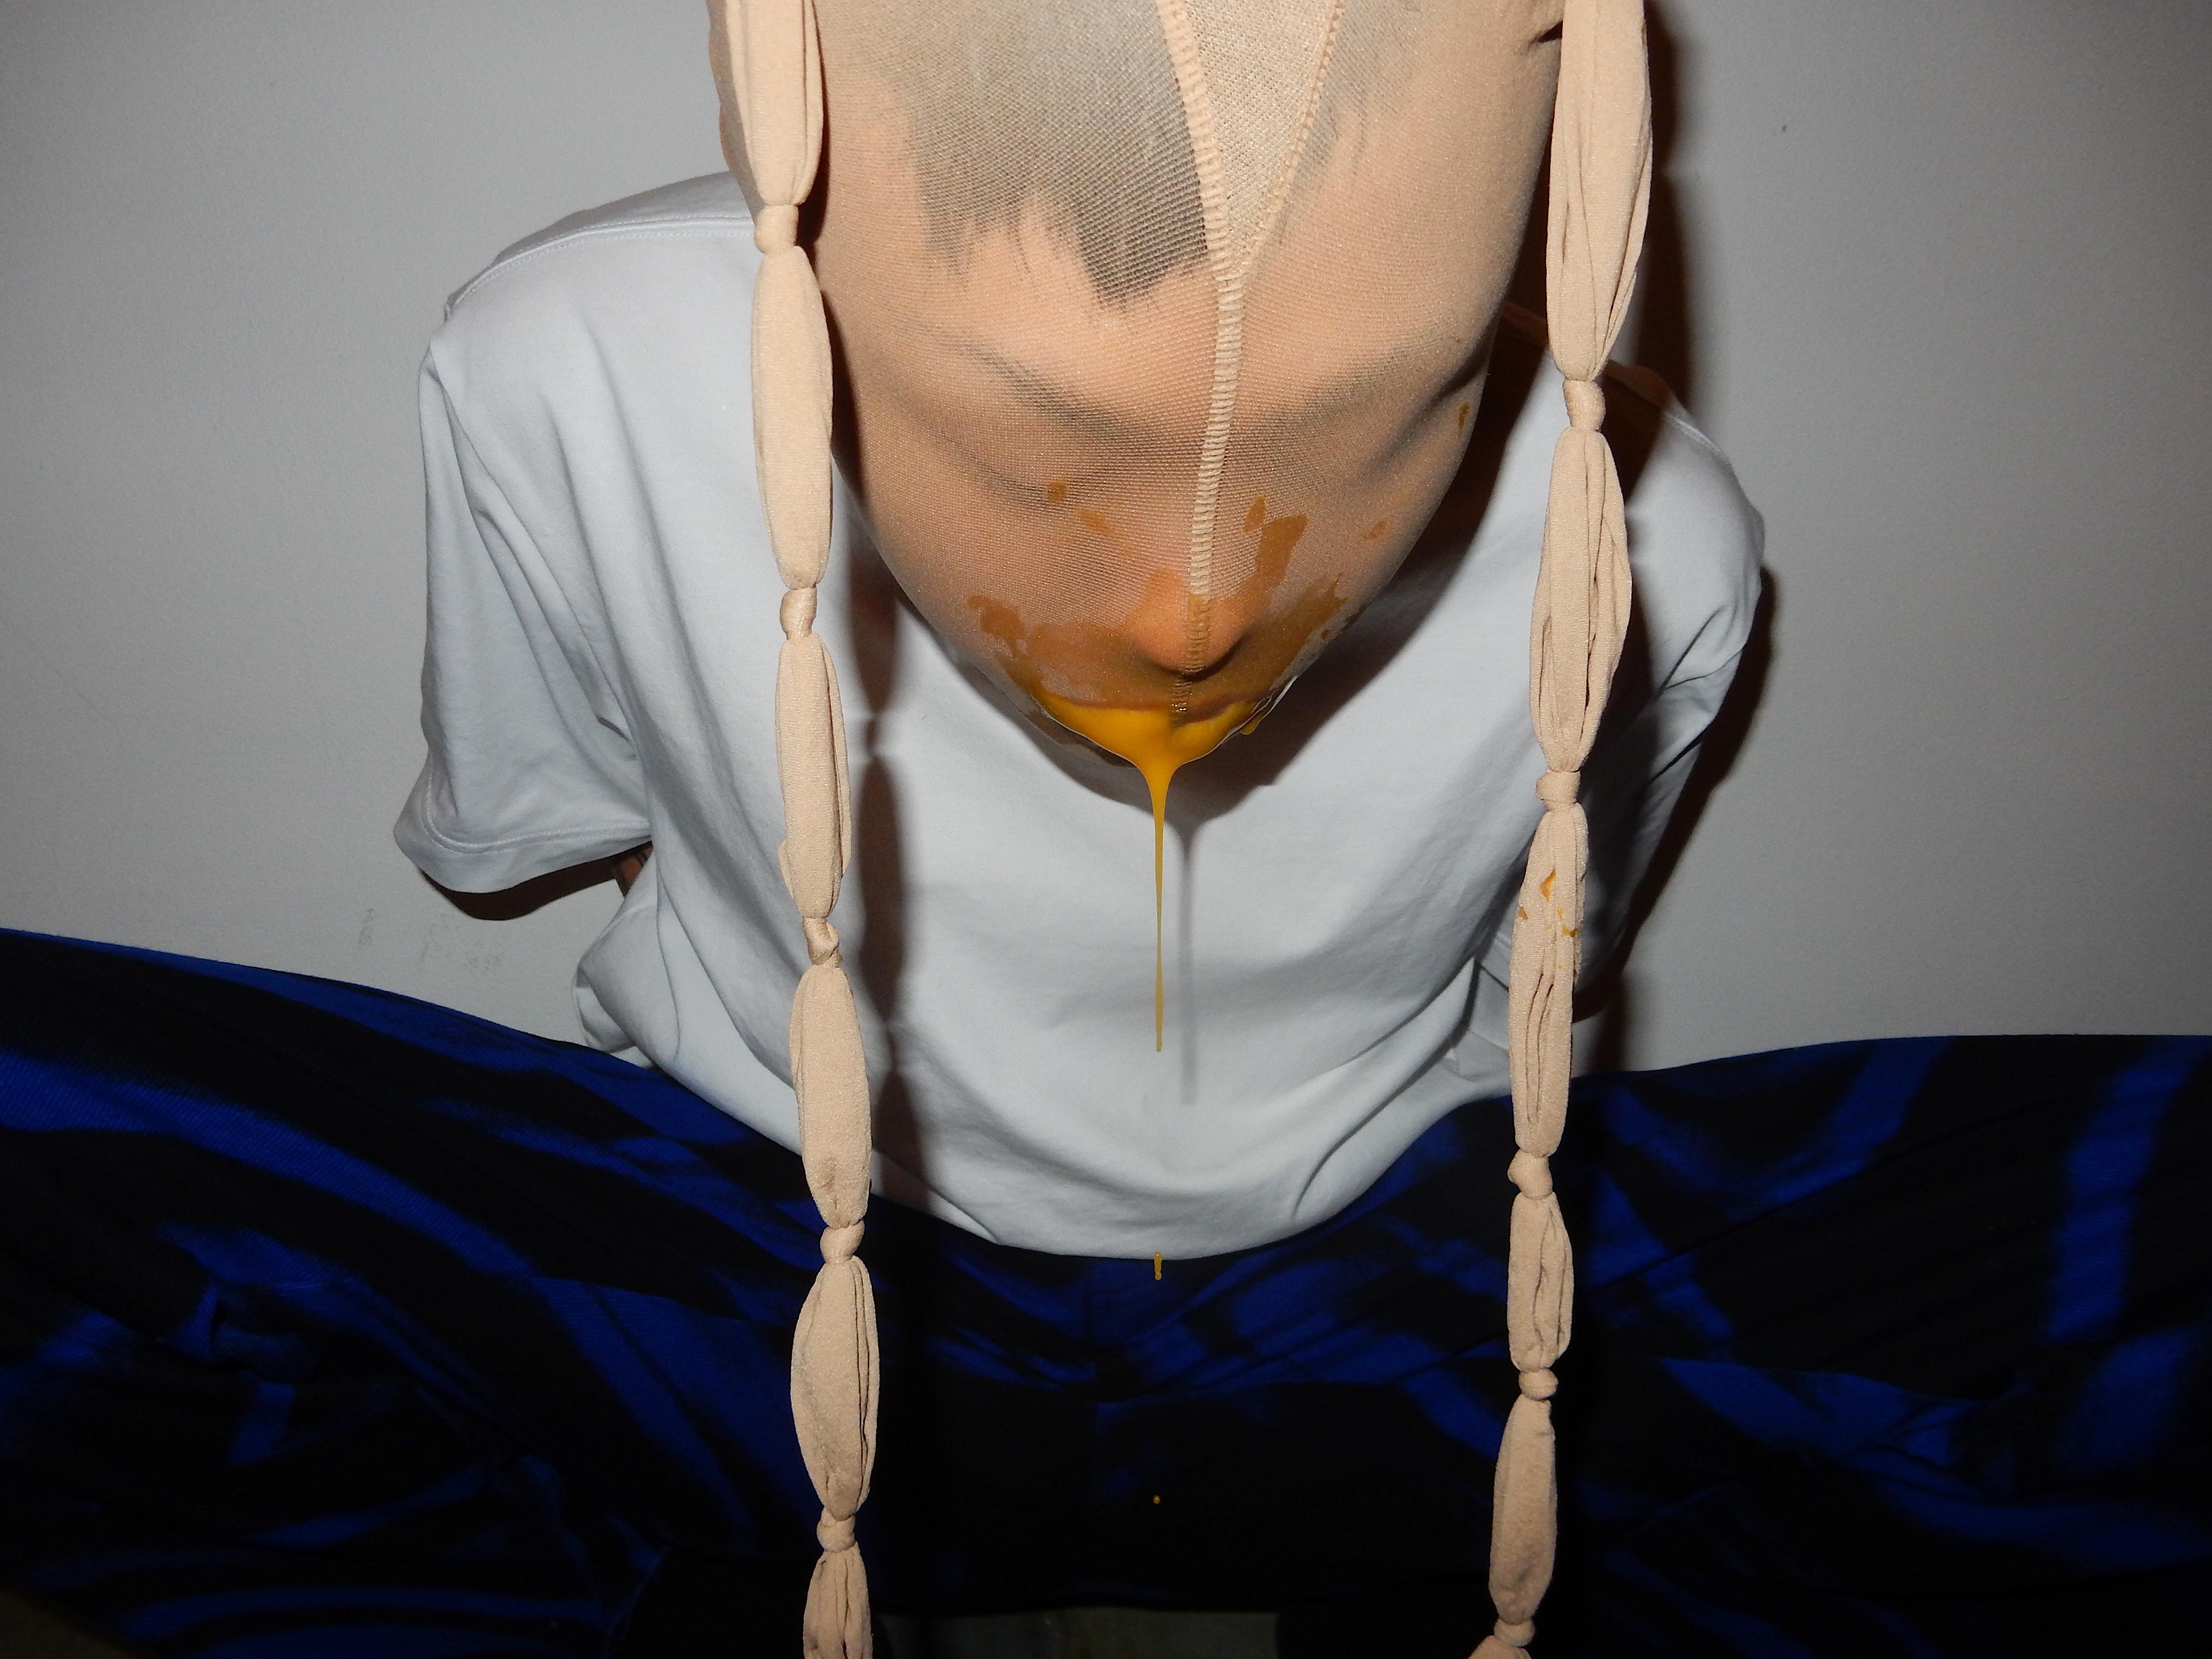 Person vomiting an orange liquid, with flesh-colored tights on the head, from Funkenstein